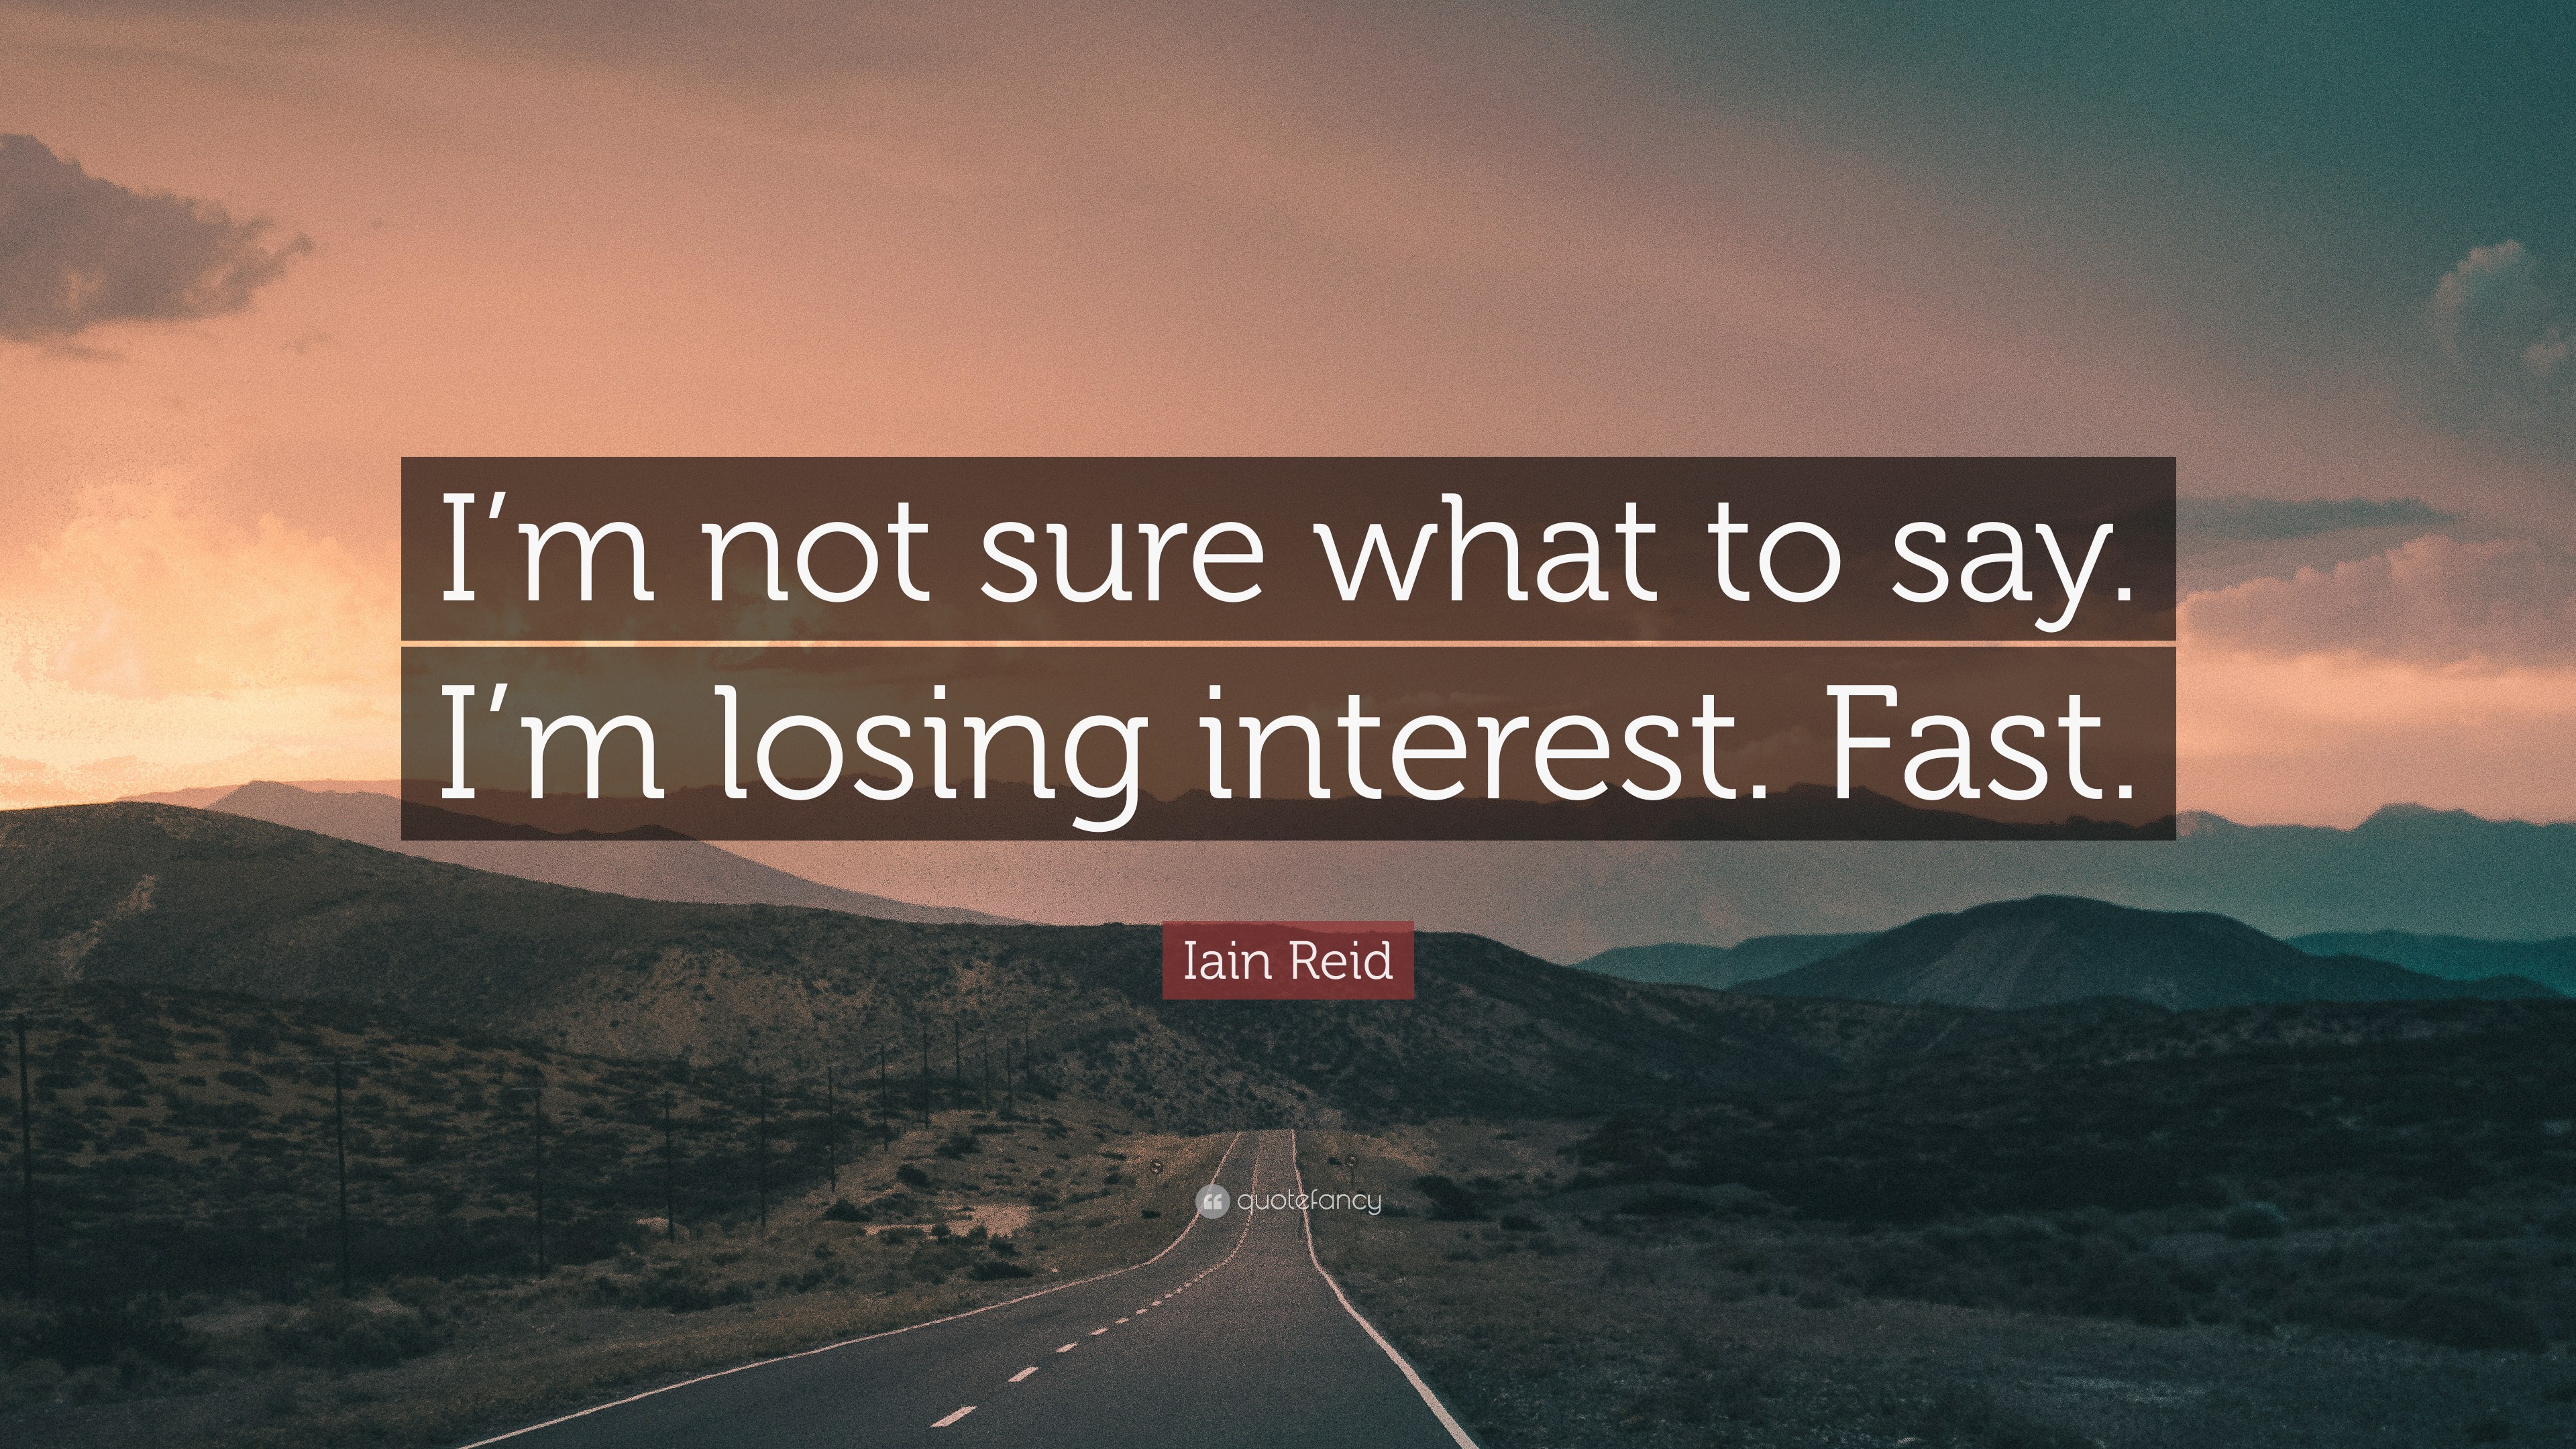 Iain Reid Quote: “I'm not sure what to say. I'm losing interest. Fast.”